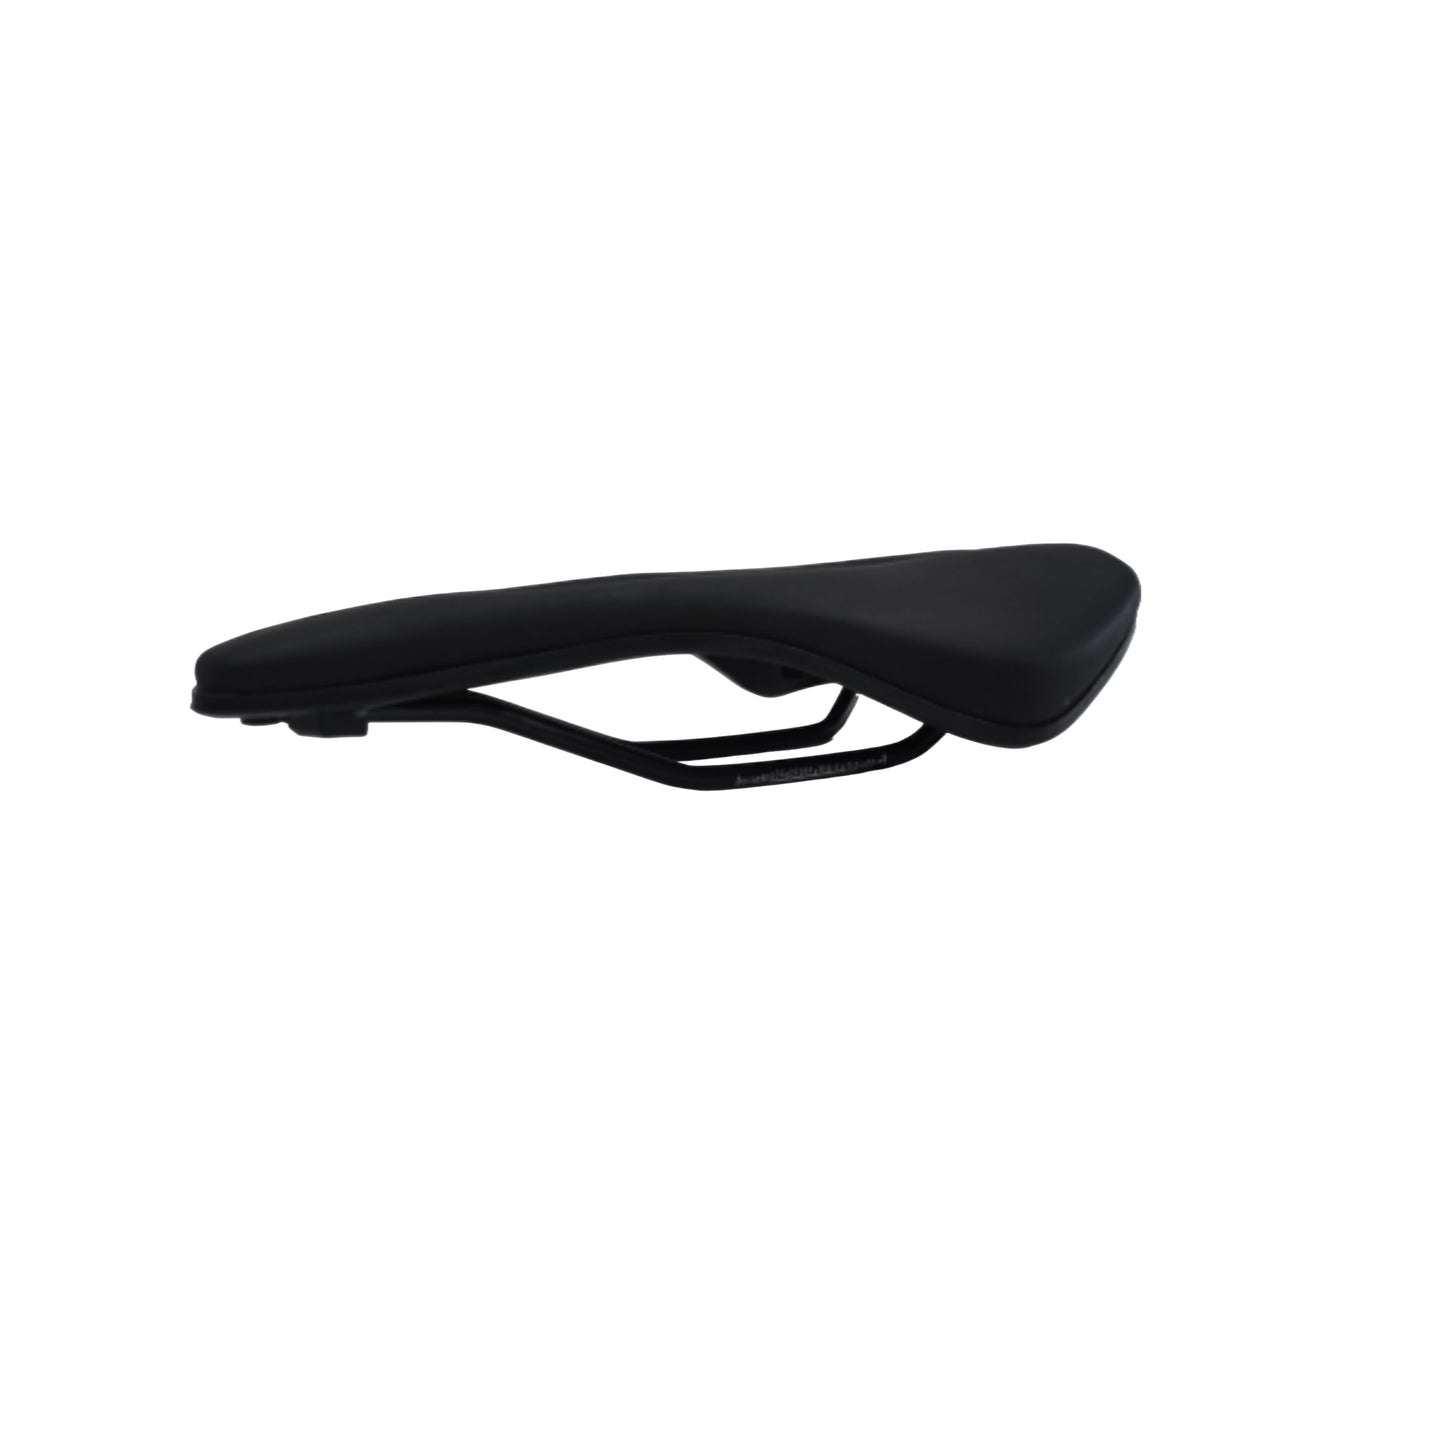 Bicycle narror saddle with hole spare part for mtb ,road bike and hybrid cycle by omobikes side view